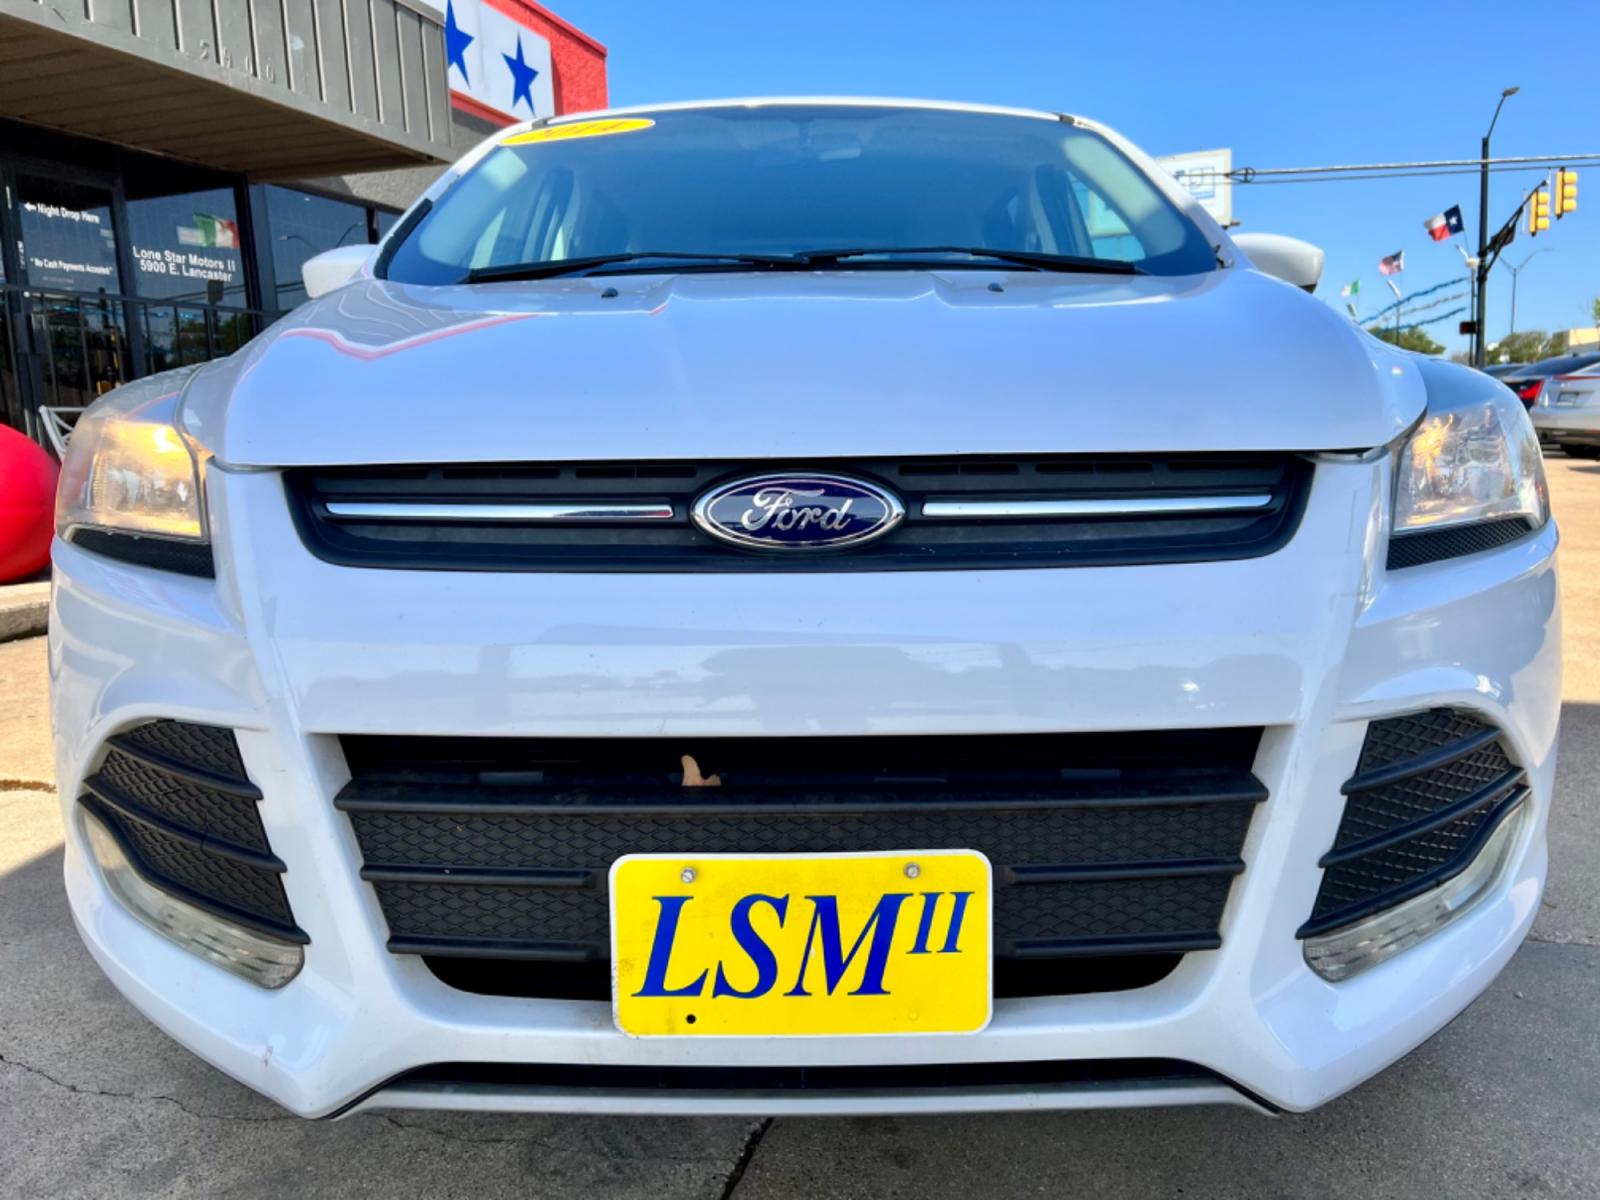 2014 WHITE FORD ESCAPE (1FMCU9GX7EU) , located at 5900 E. Lancaster Ave., Fort Worth, TX, 76112, (817) 457-5456, 0.000000, 0.000000 - This is a 2014 FORD ESCAPE SPORT UTILITY 4-DR that is in excellent condition. There are no dents or scratches. The interior is clean with no rips or tears or stains. All power windows, door locks and seats. Ice cold AC for those hot Texas summer days. It is equipped with a CD player, AM/FM radio, AU - Photo #1